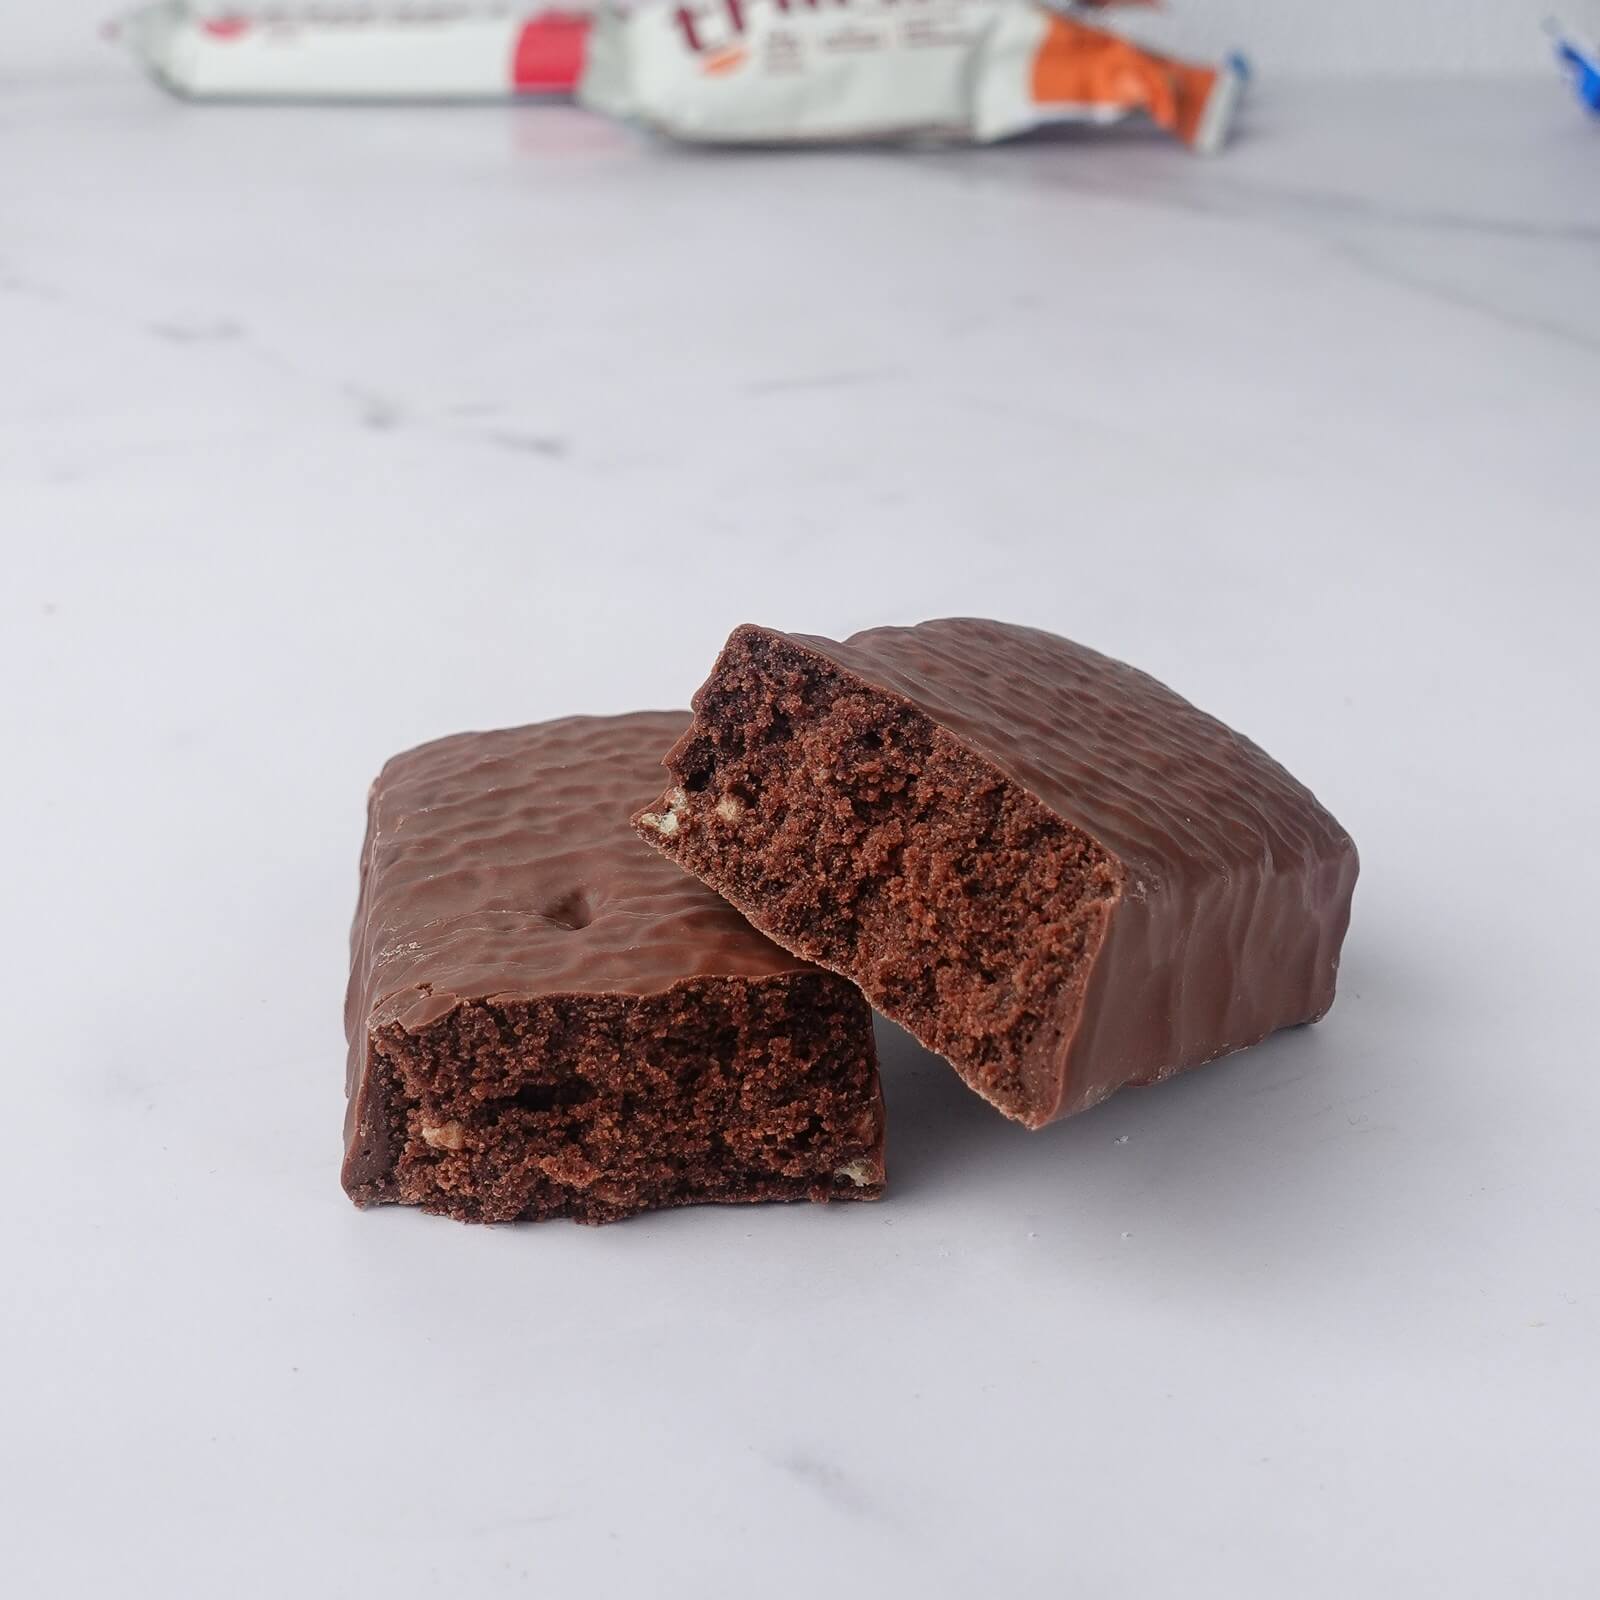 think! High Protein Bar, Brownie Crunch – Think Products